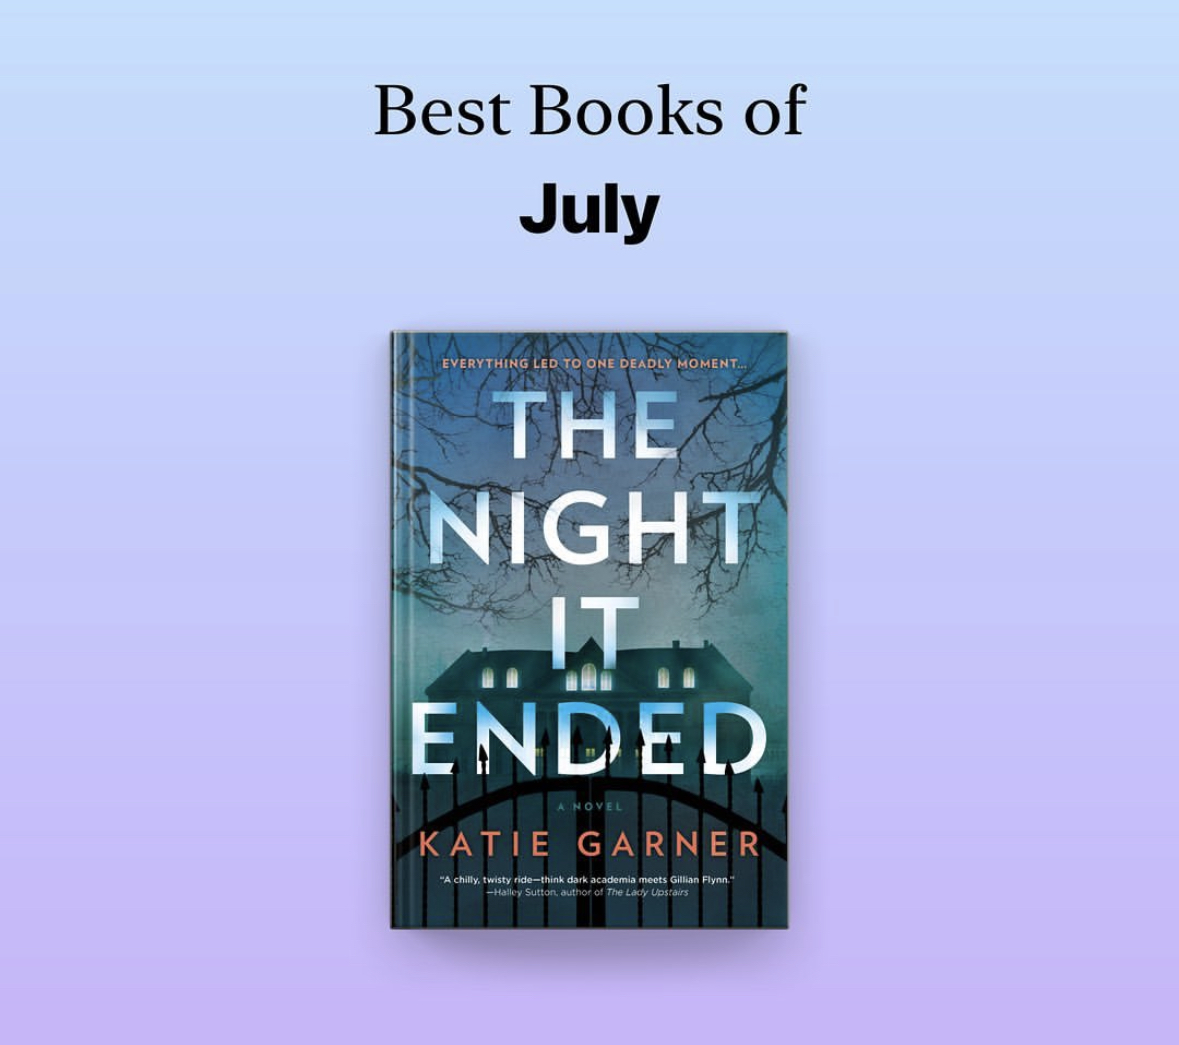 Thank you @AppleBooks for including The Night It Ended as one of the Best Books of July! 😍